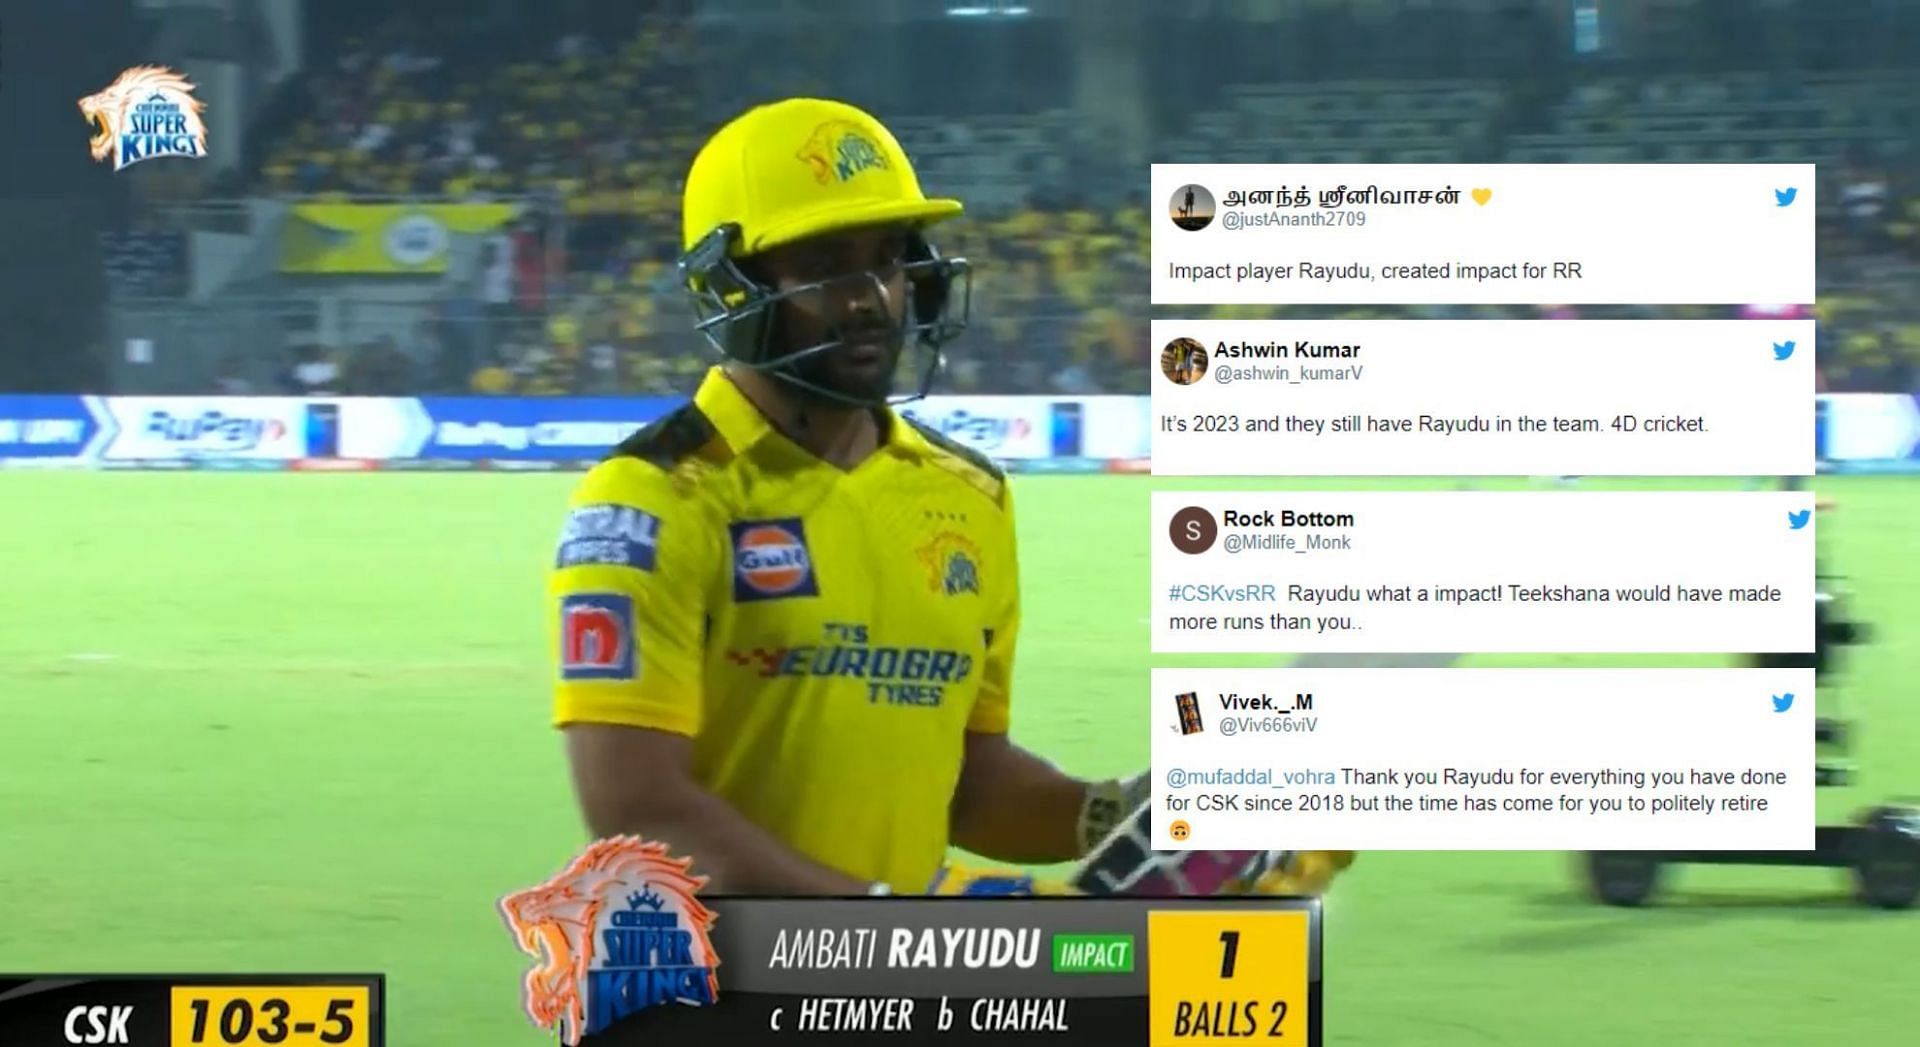 Ambati Rayudu failed to deliver as impact player for CSK in IPL 2023 vs RR on Wednesday.